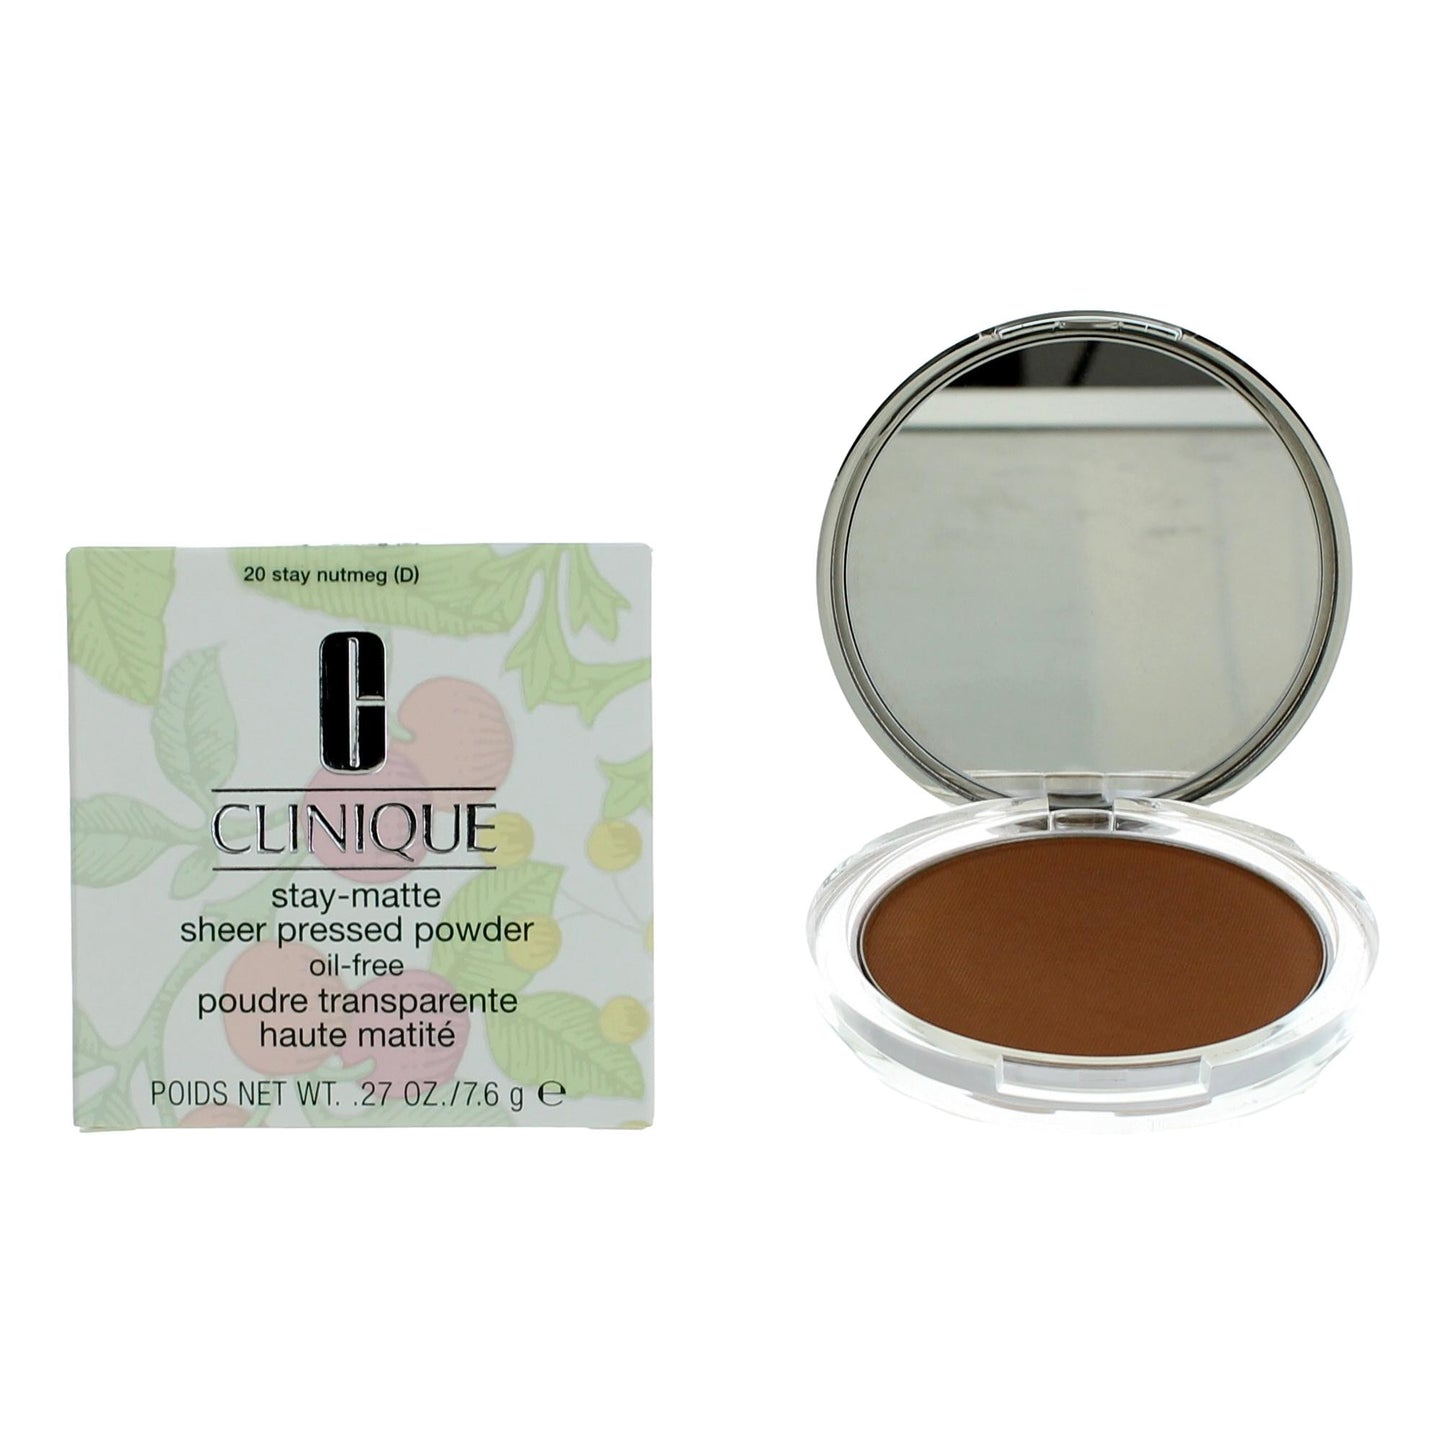 Clinique Stay-Matte by Clinique, .27oz Sheer Pressed Powder - 20 Stay Nutmeg - 20 Stay Nutmeg